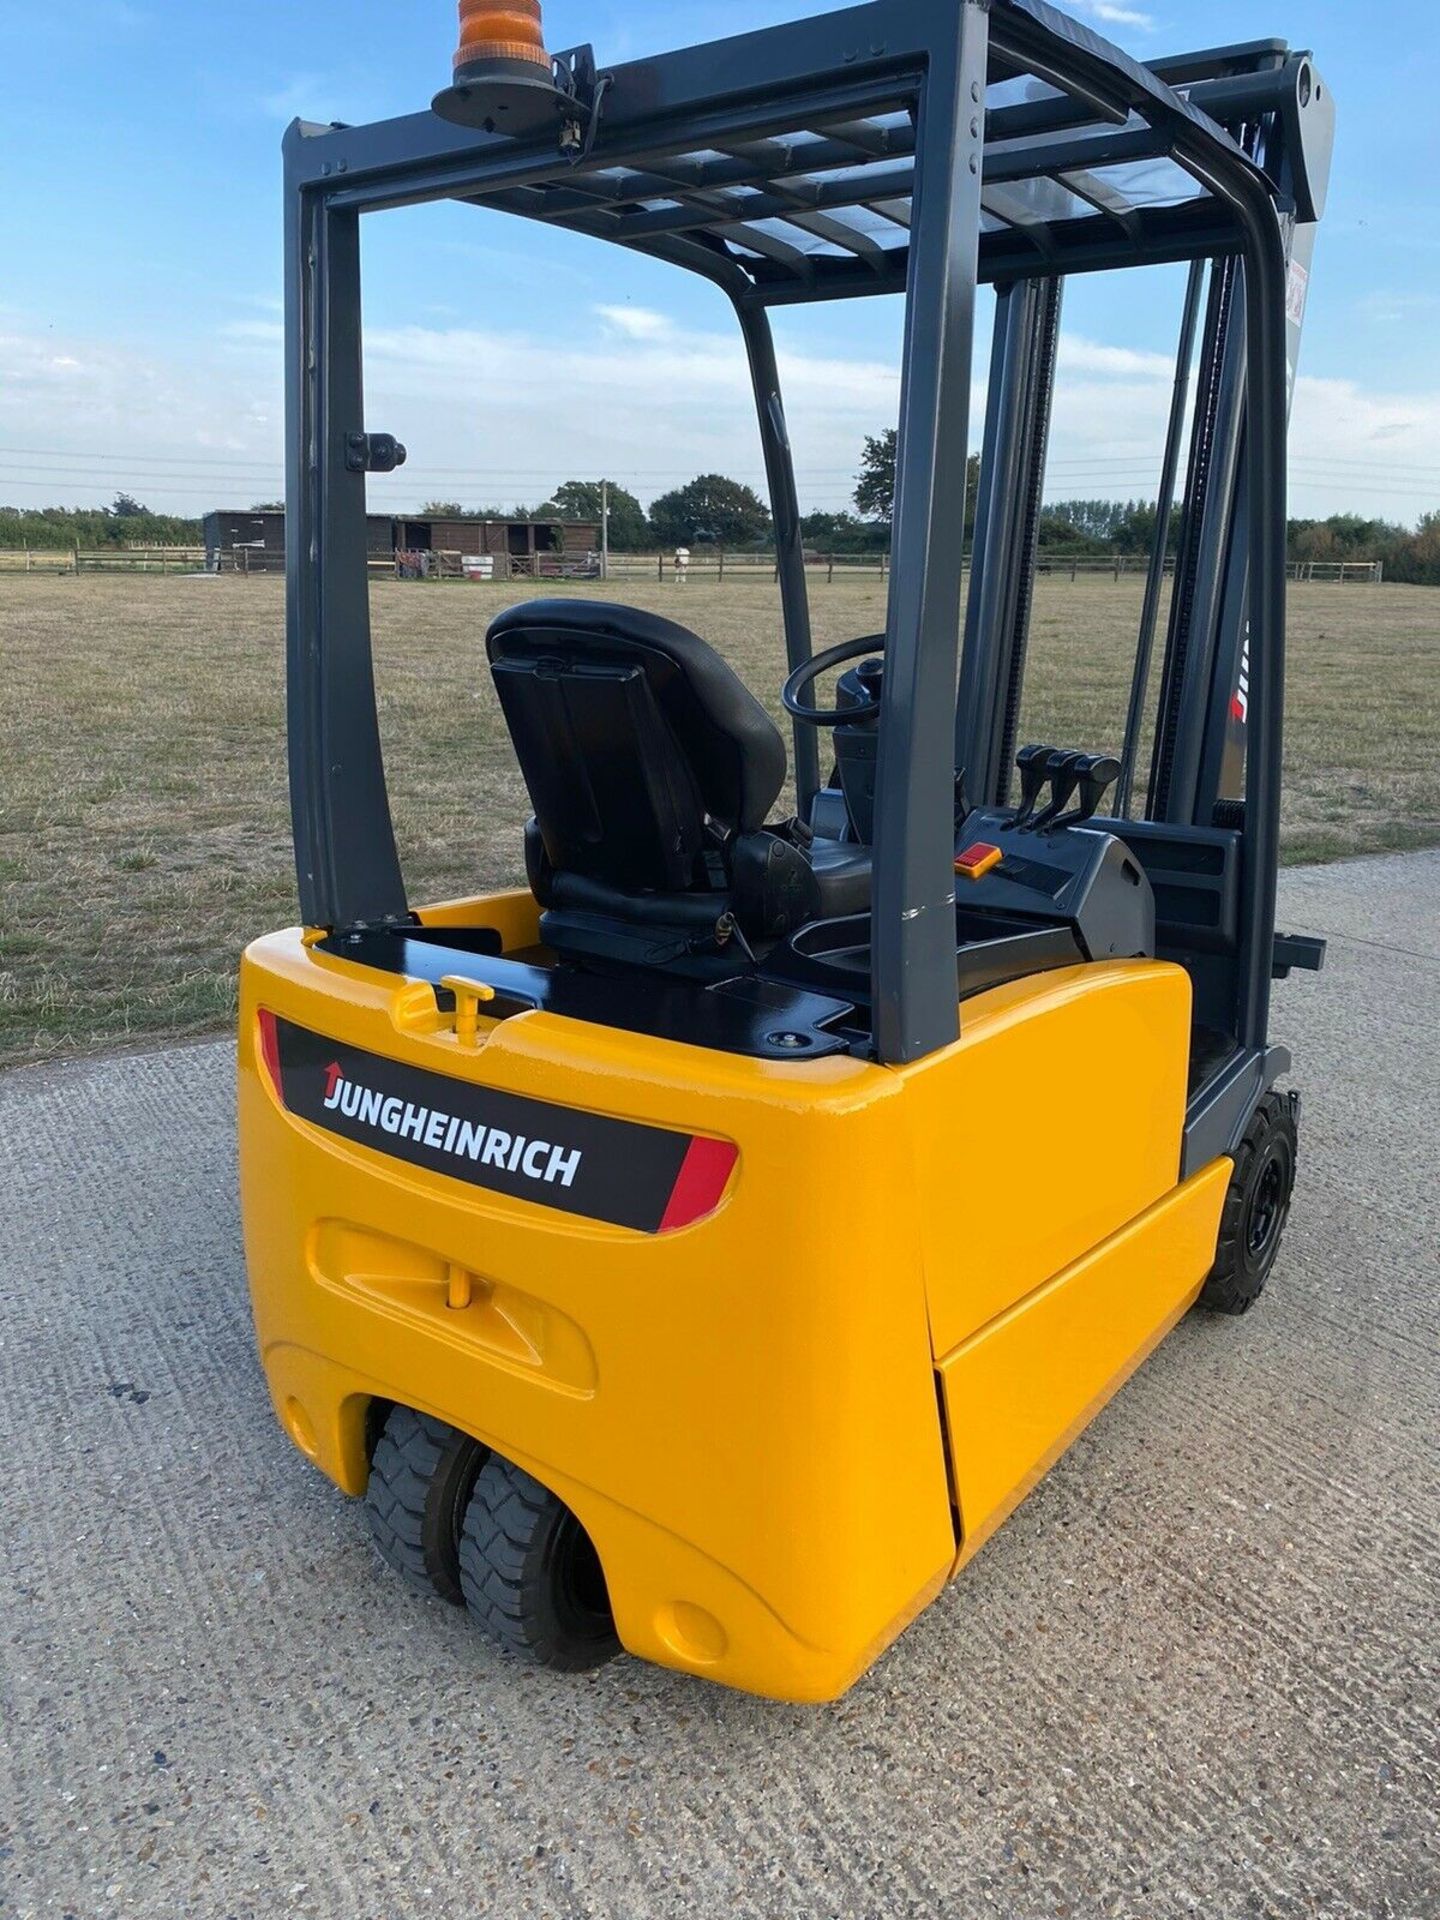 Junghinrinch 1.6 Electric Forklift - Image 4 of 5